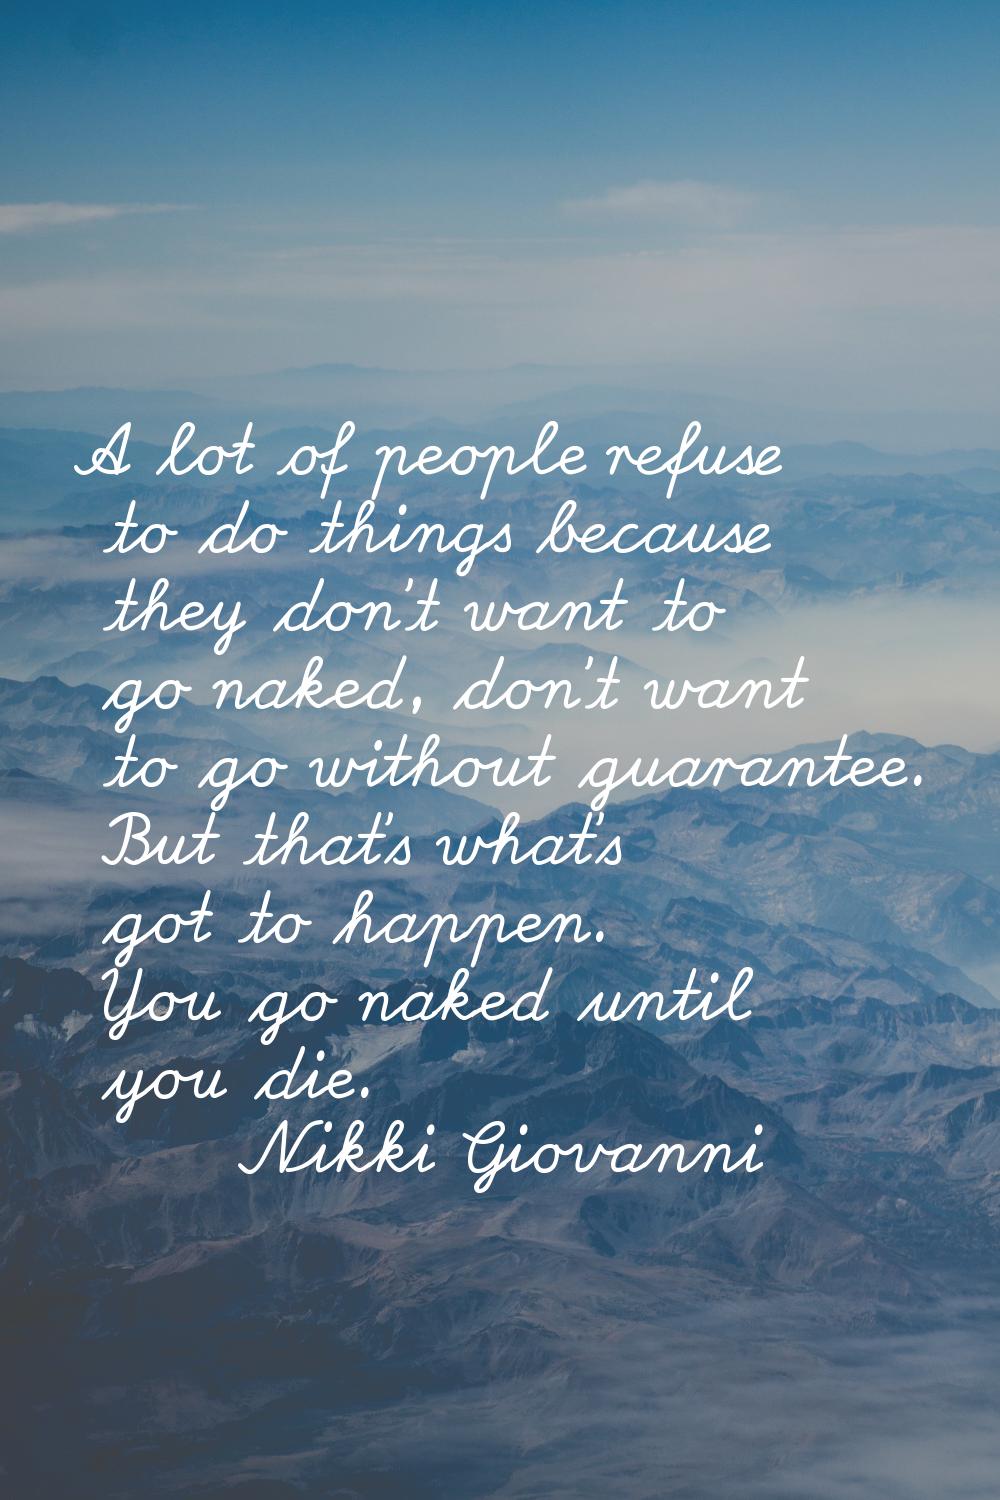 A lot of people refuse to do things because they don't want to go naked, don't want to go without g